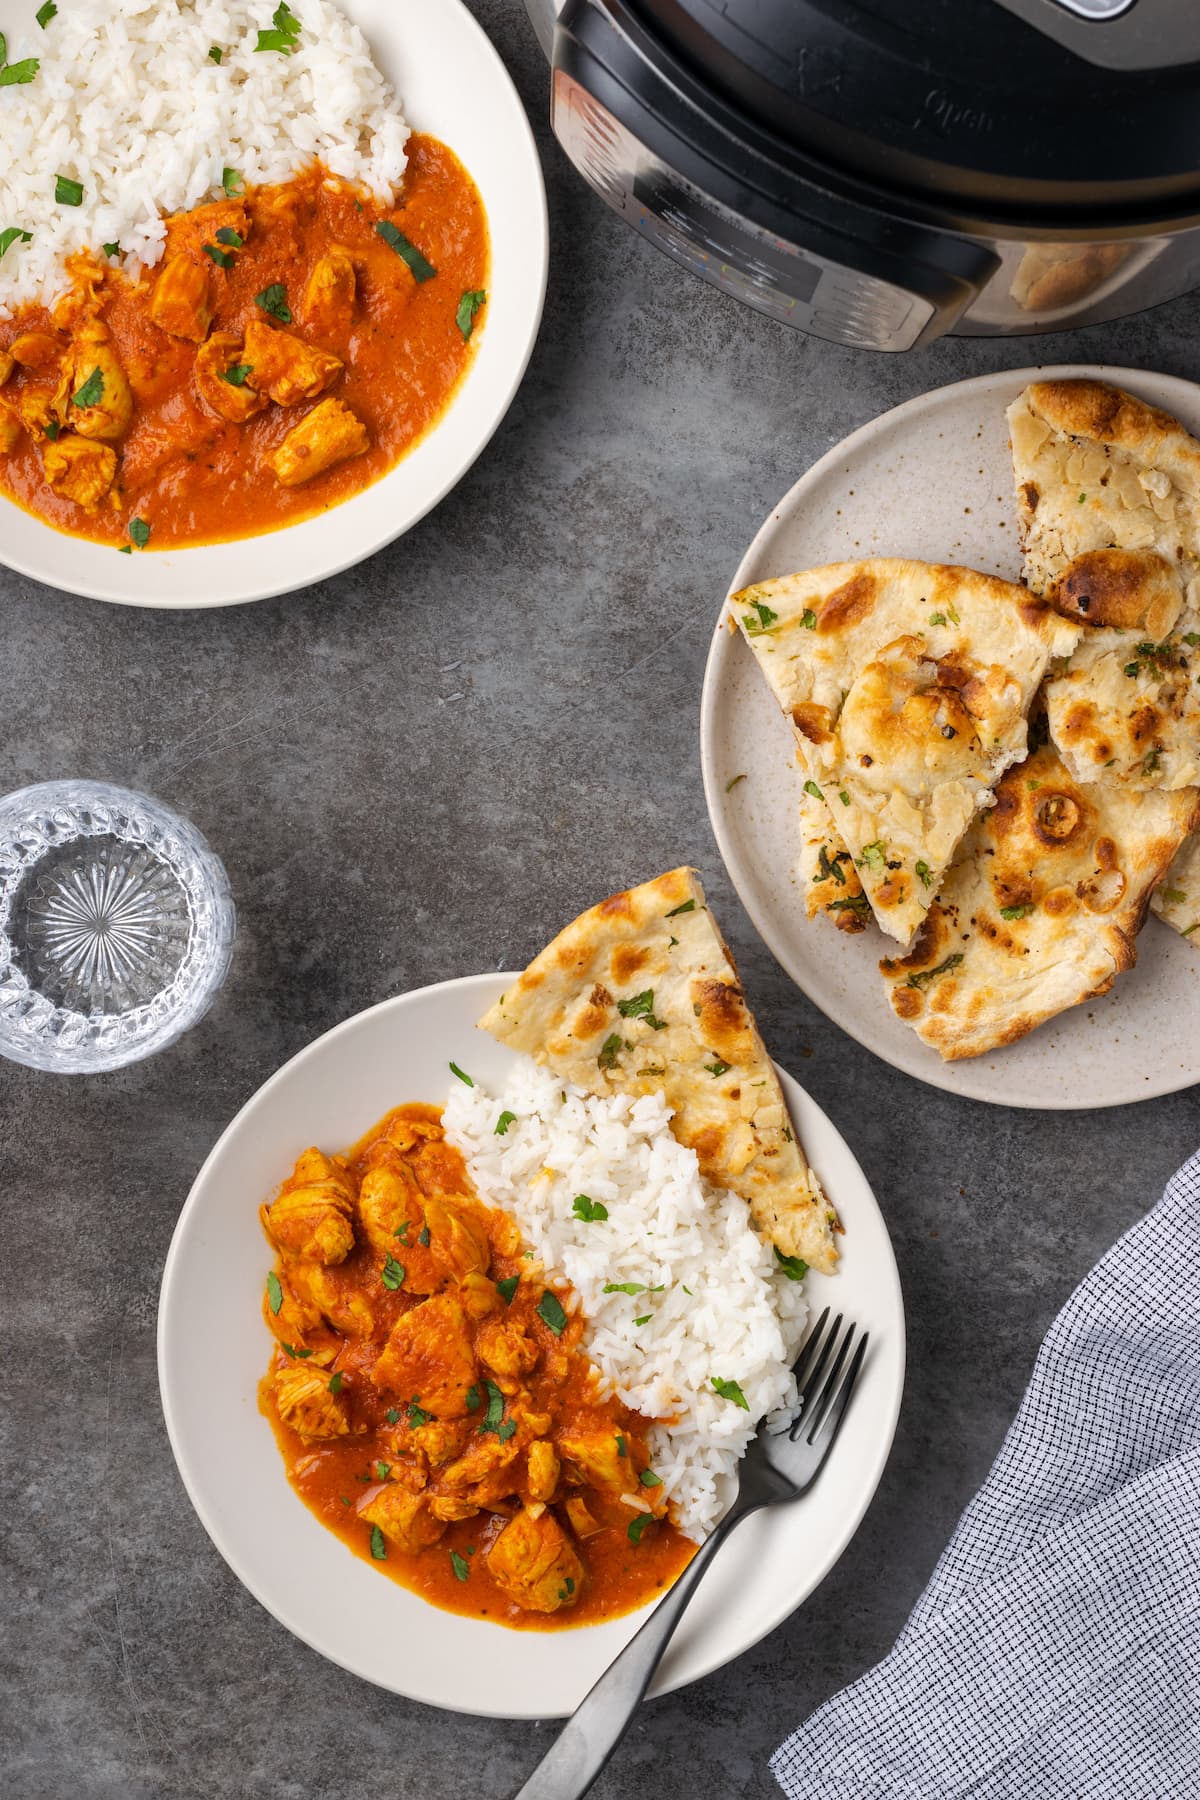 Overhead view of two plates filled with butter chicken and a side of rice, next to a plate of naan and the Instant Pot.